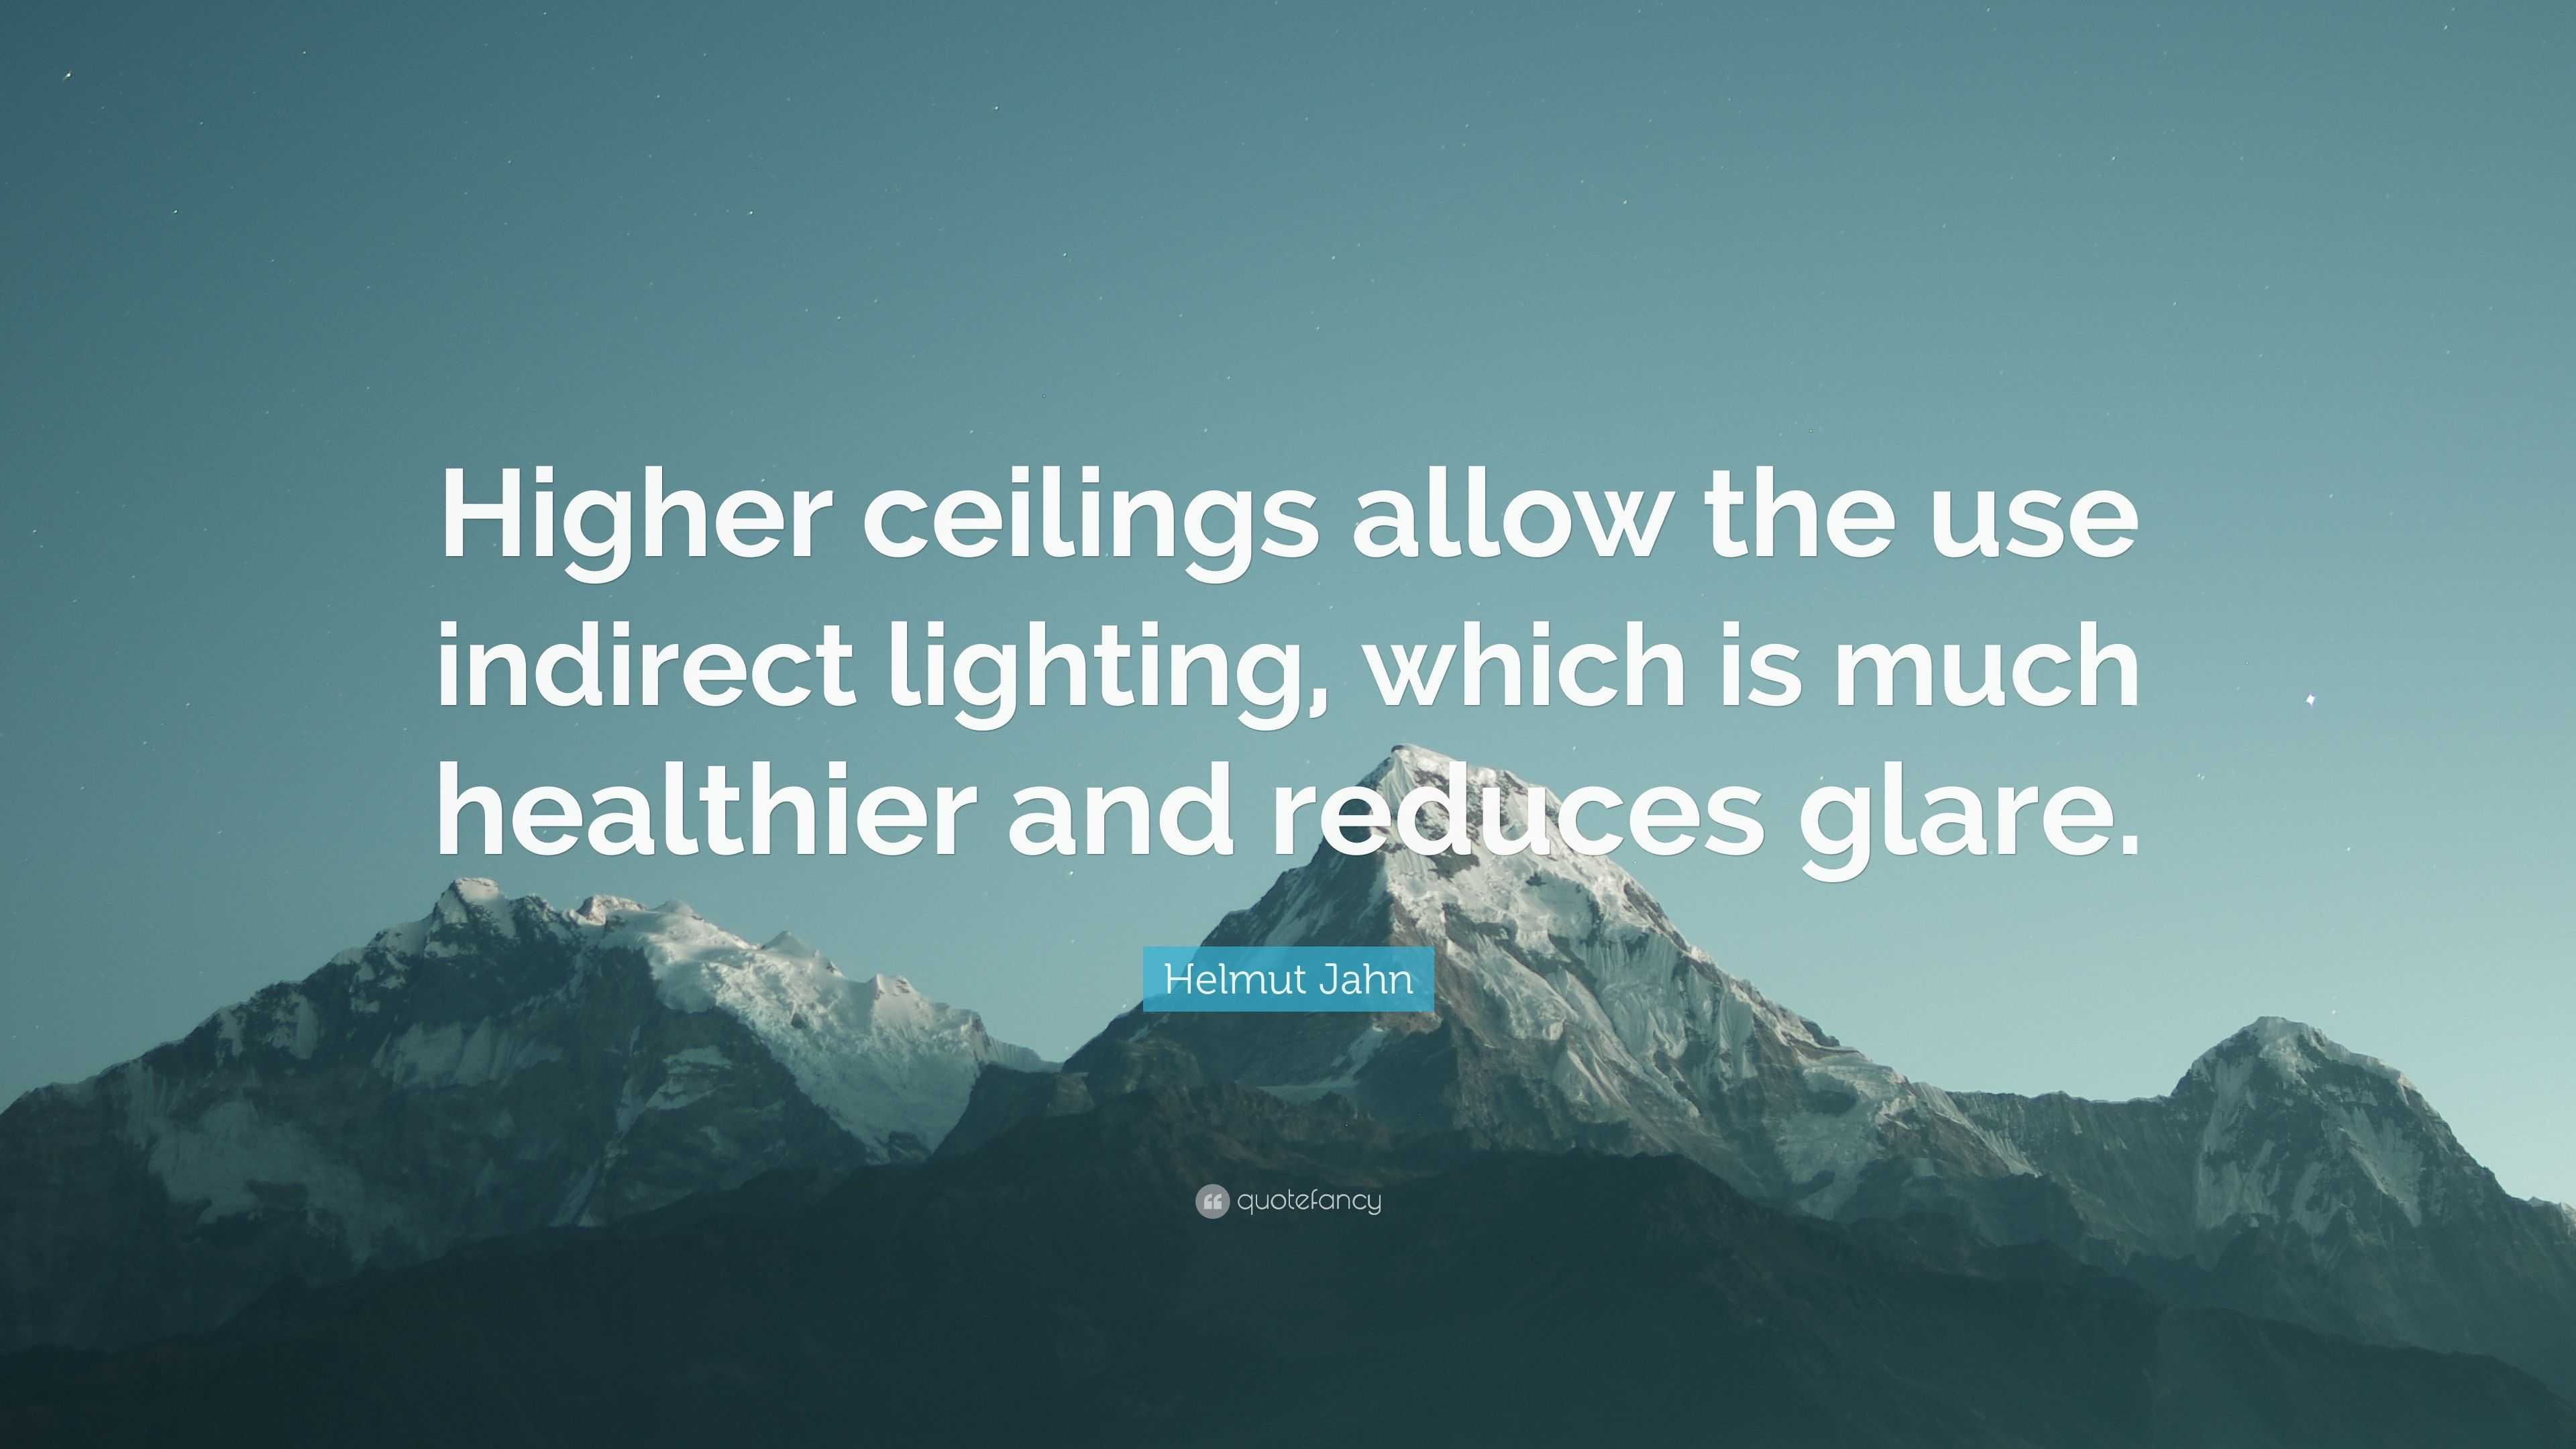 Helmut Jahn Quote: “Higher ceilings allow the use indirect lighting, is much and reduces